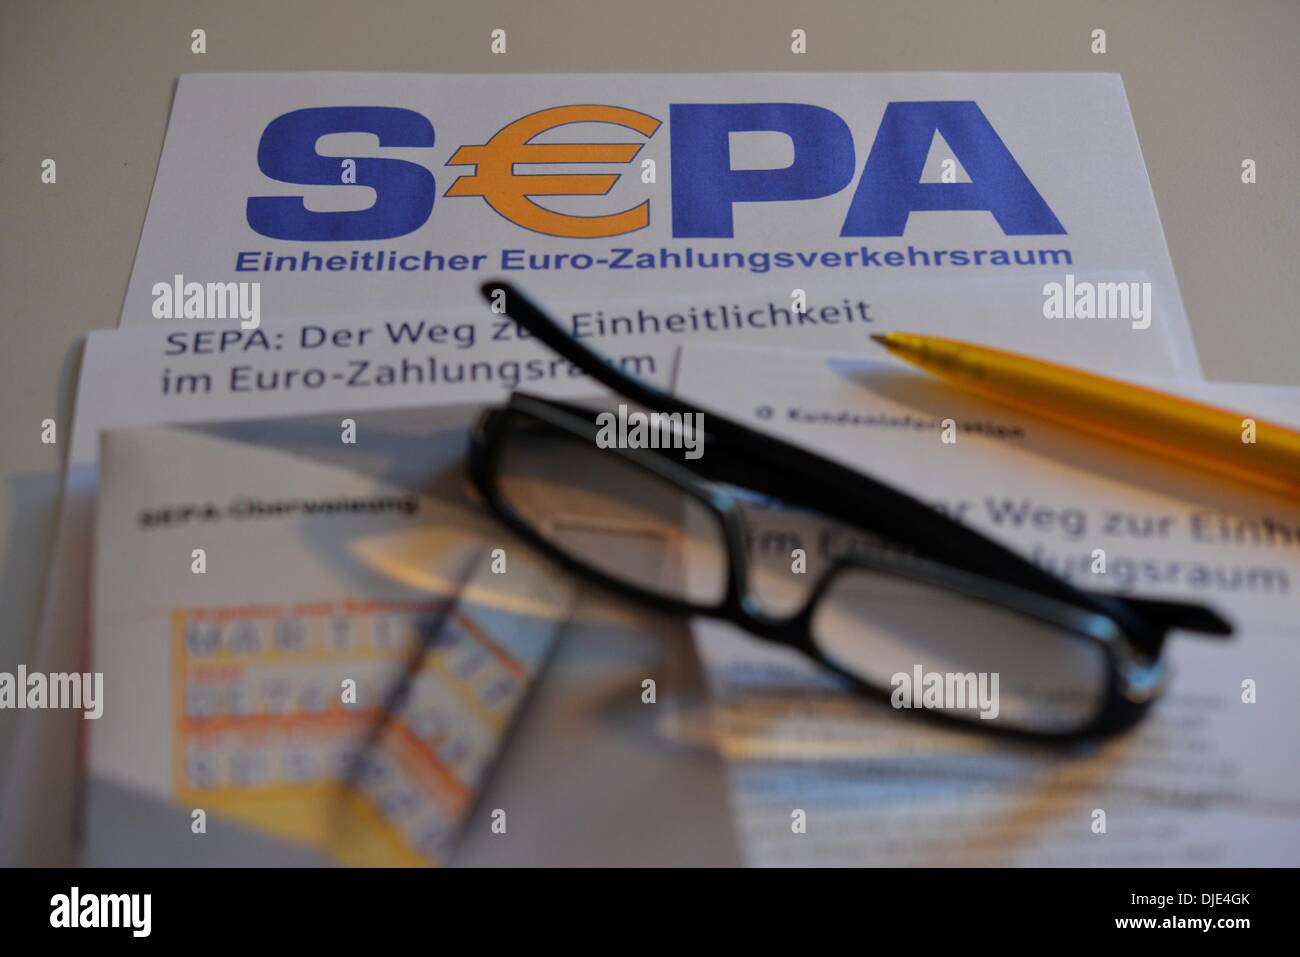 Osterode, Germany. 27th Nov, 2013. Illustration for Single Euro Payments Area (SEPA), which is a payment-integration initiative of the European Union for simplification of bank transfers denominated in euro, pictured in Osterode, Germany, 27 November 2013. Starting on 01 February 2014, the national account numbers are replaced by the IBAN number for national and international bank transfers as well as for direct debit. Photo: Frank May/dpa/Alamy Live News Stock Photo